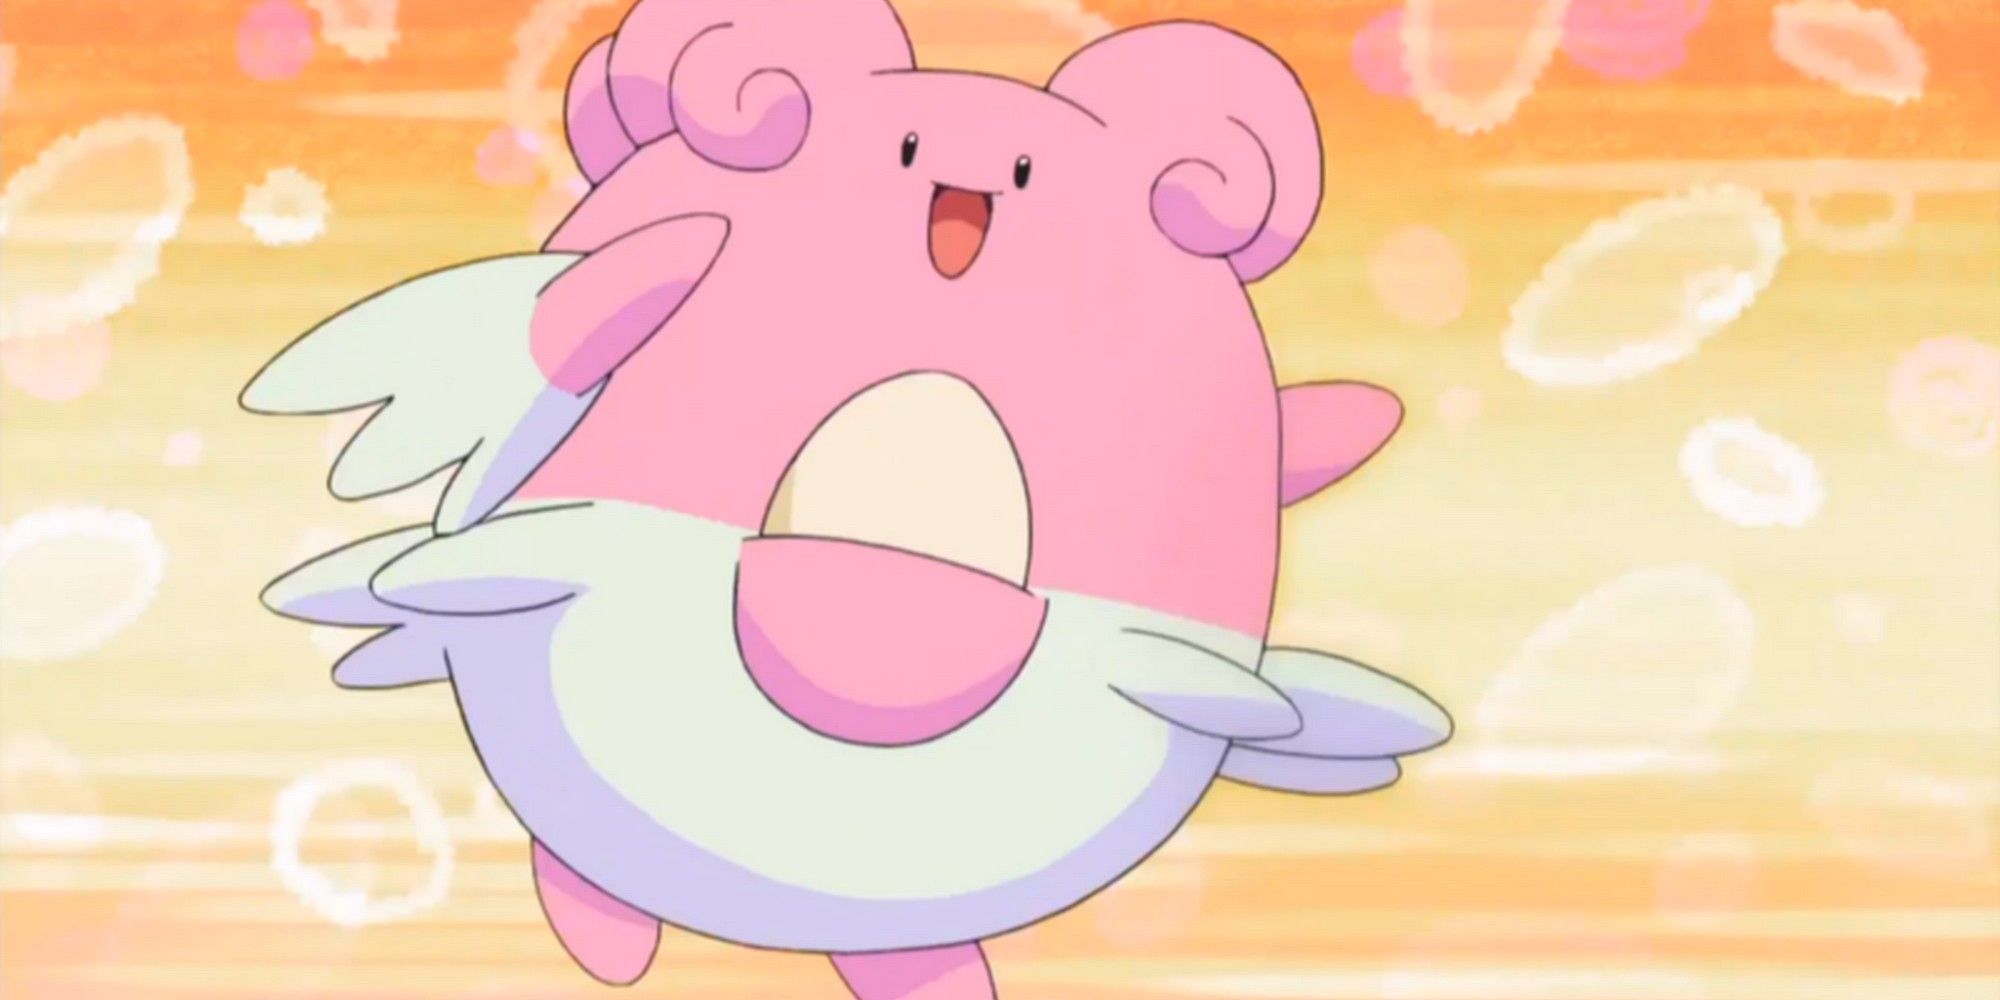 The Pokemon Blissey leaping with an egg in its pouch